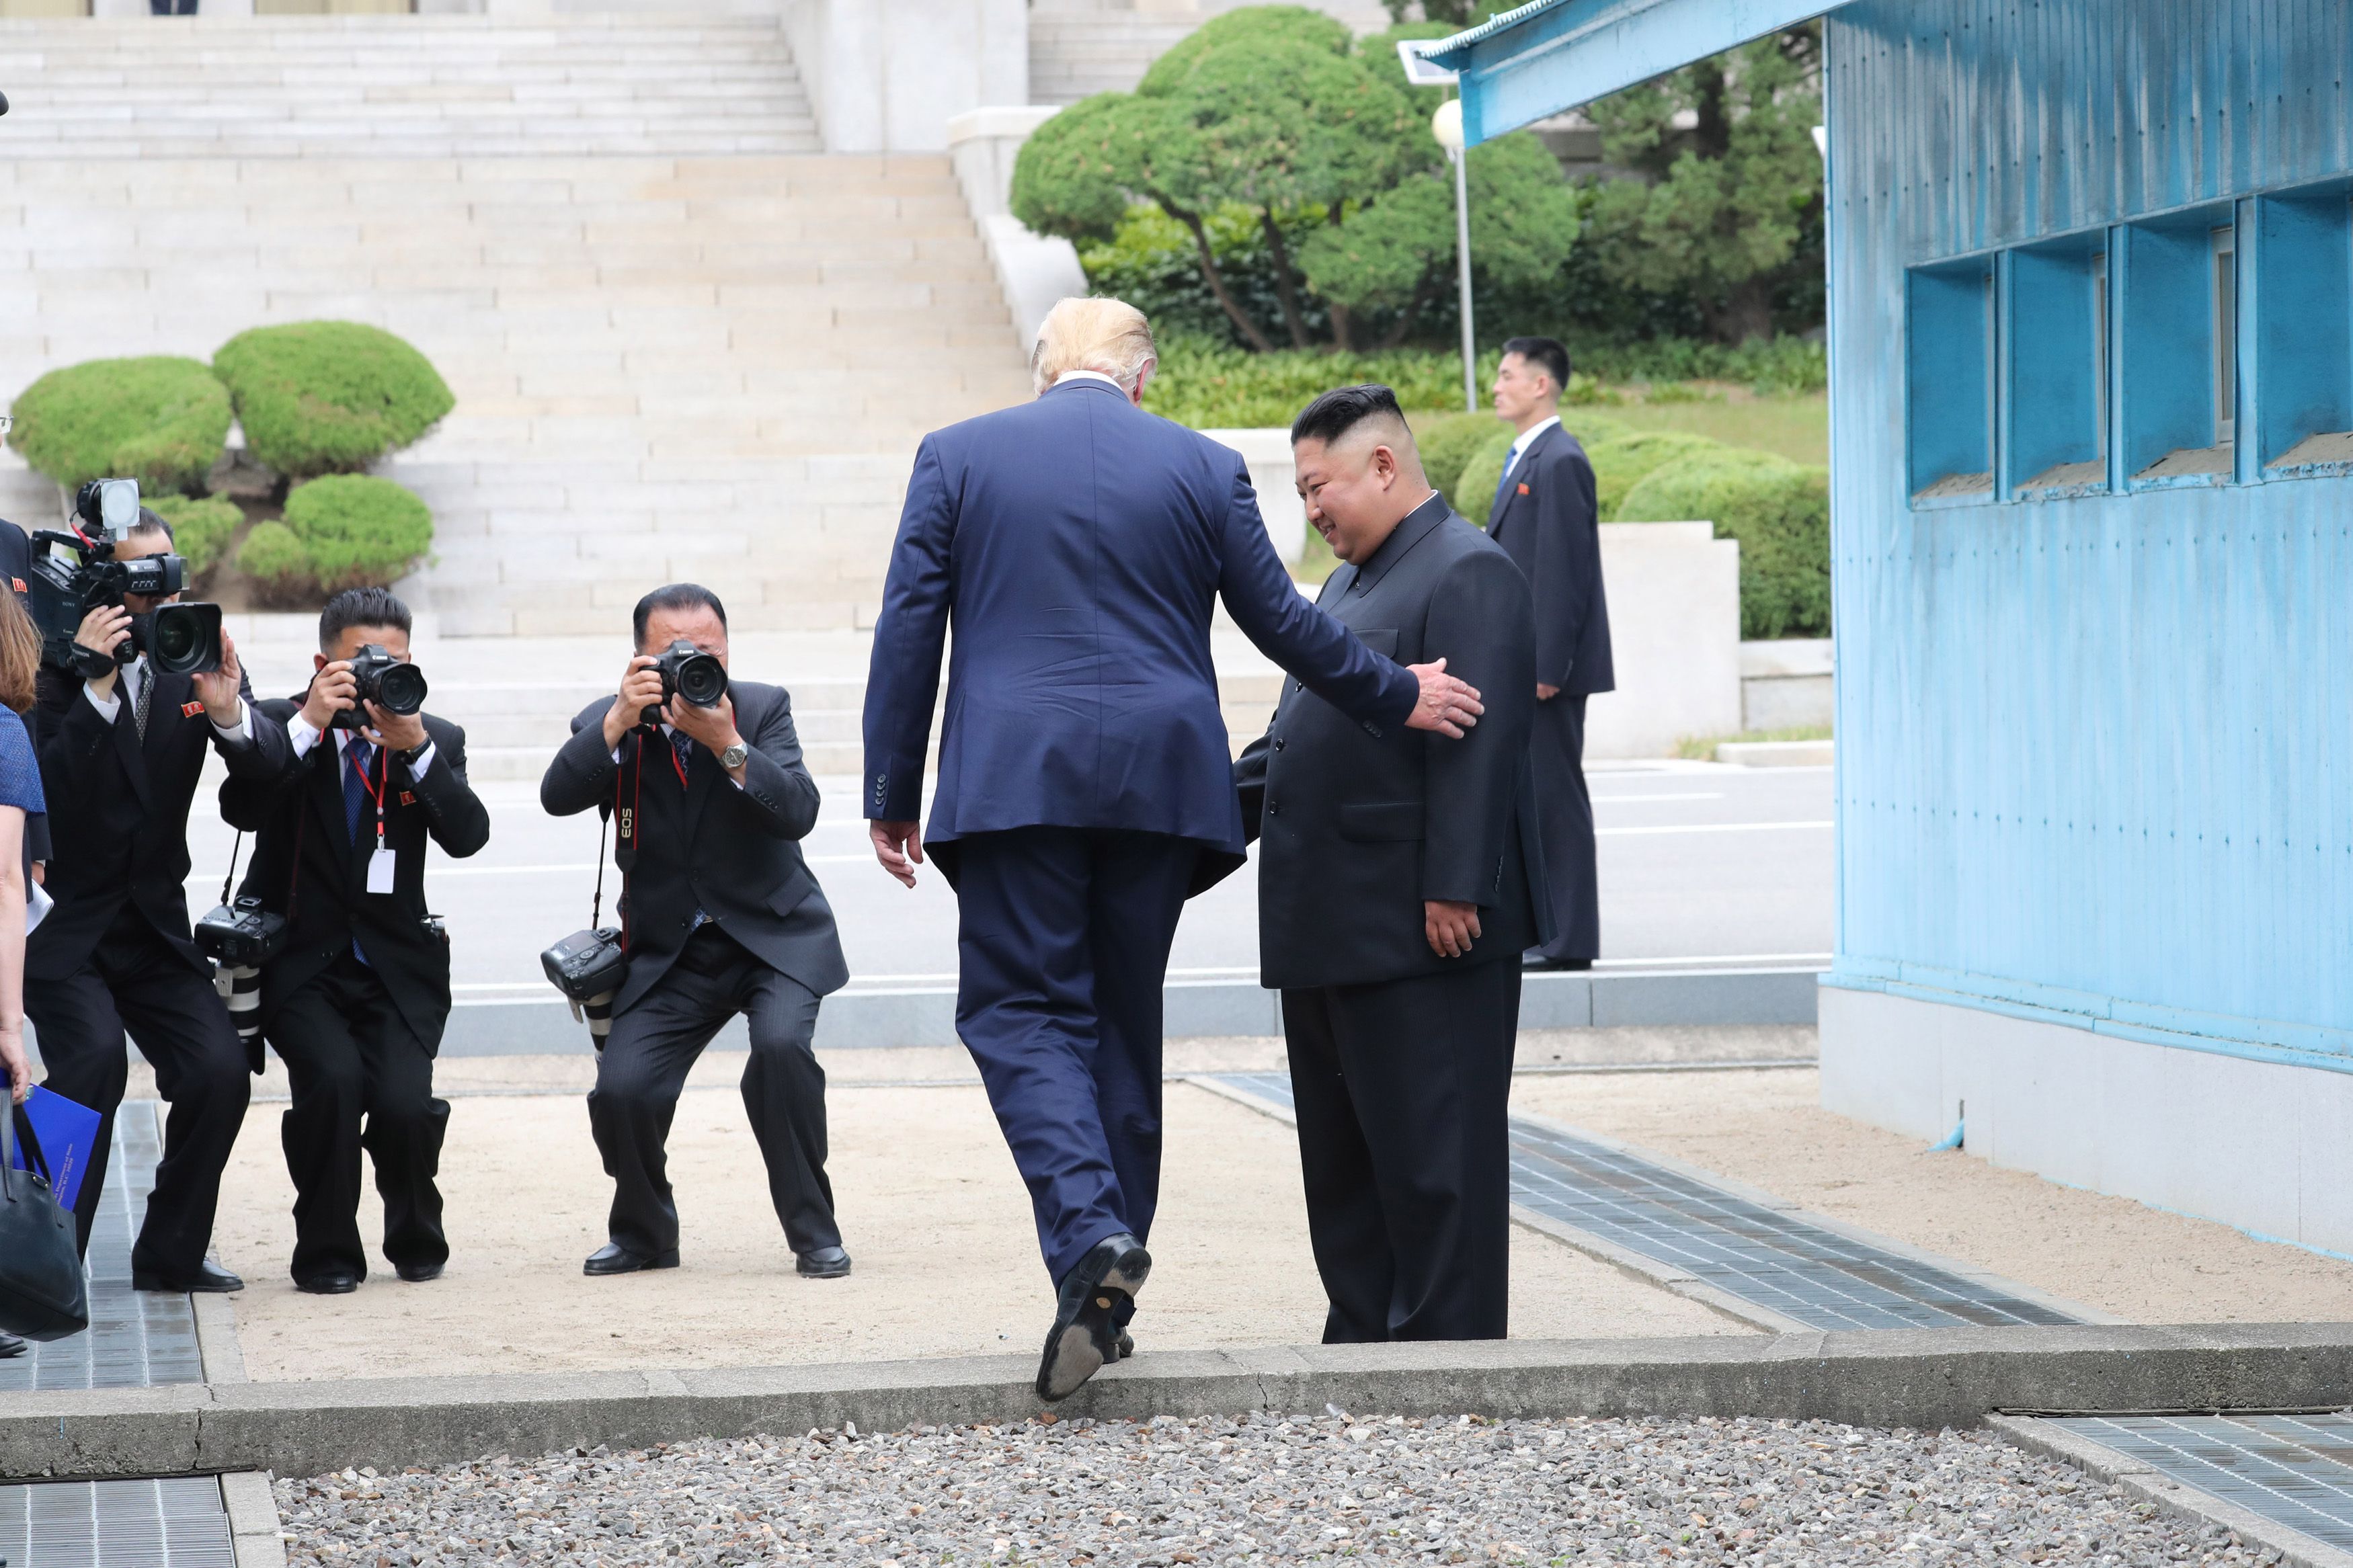  A handout photo provided by Dong-A Ilbo of North Korean leader Kim Jong Un and U.S. President Donald Trump inside the demilitarized zone (DMZ) separating the South and North Korea.